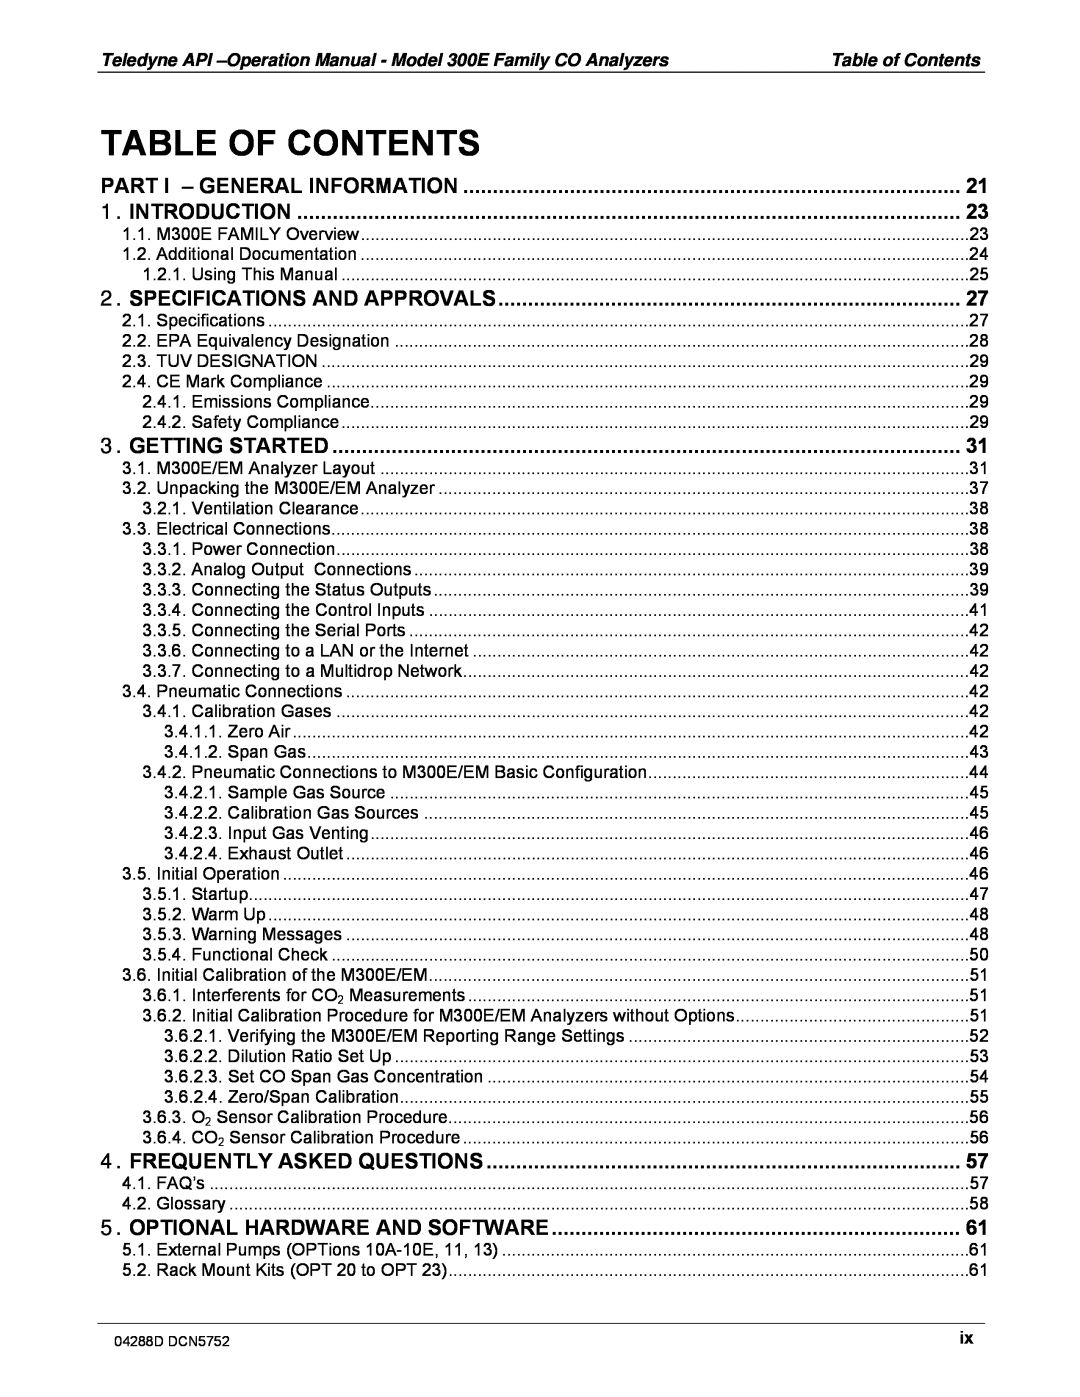 Teledyne M300EM operation manual Table Of Contents, Table of Contents 